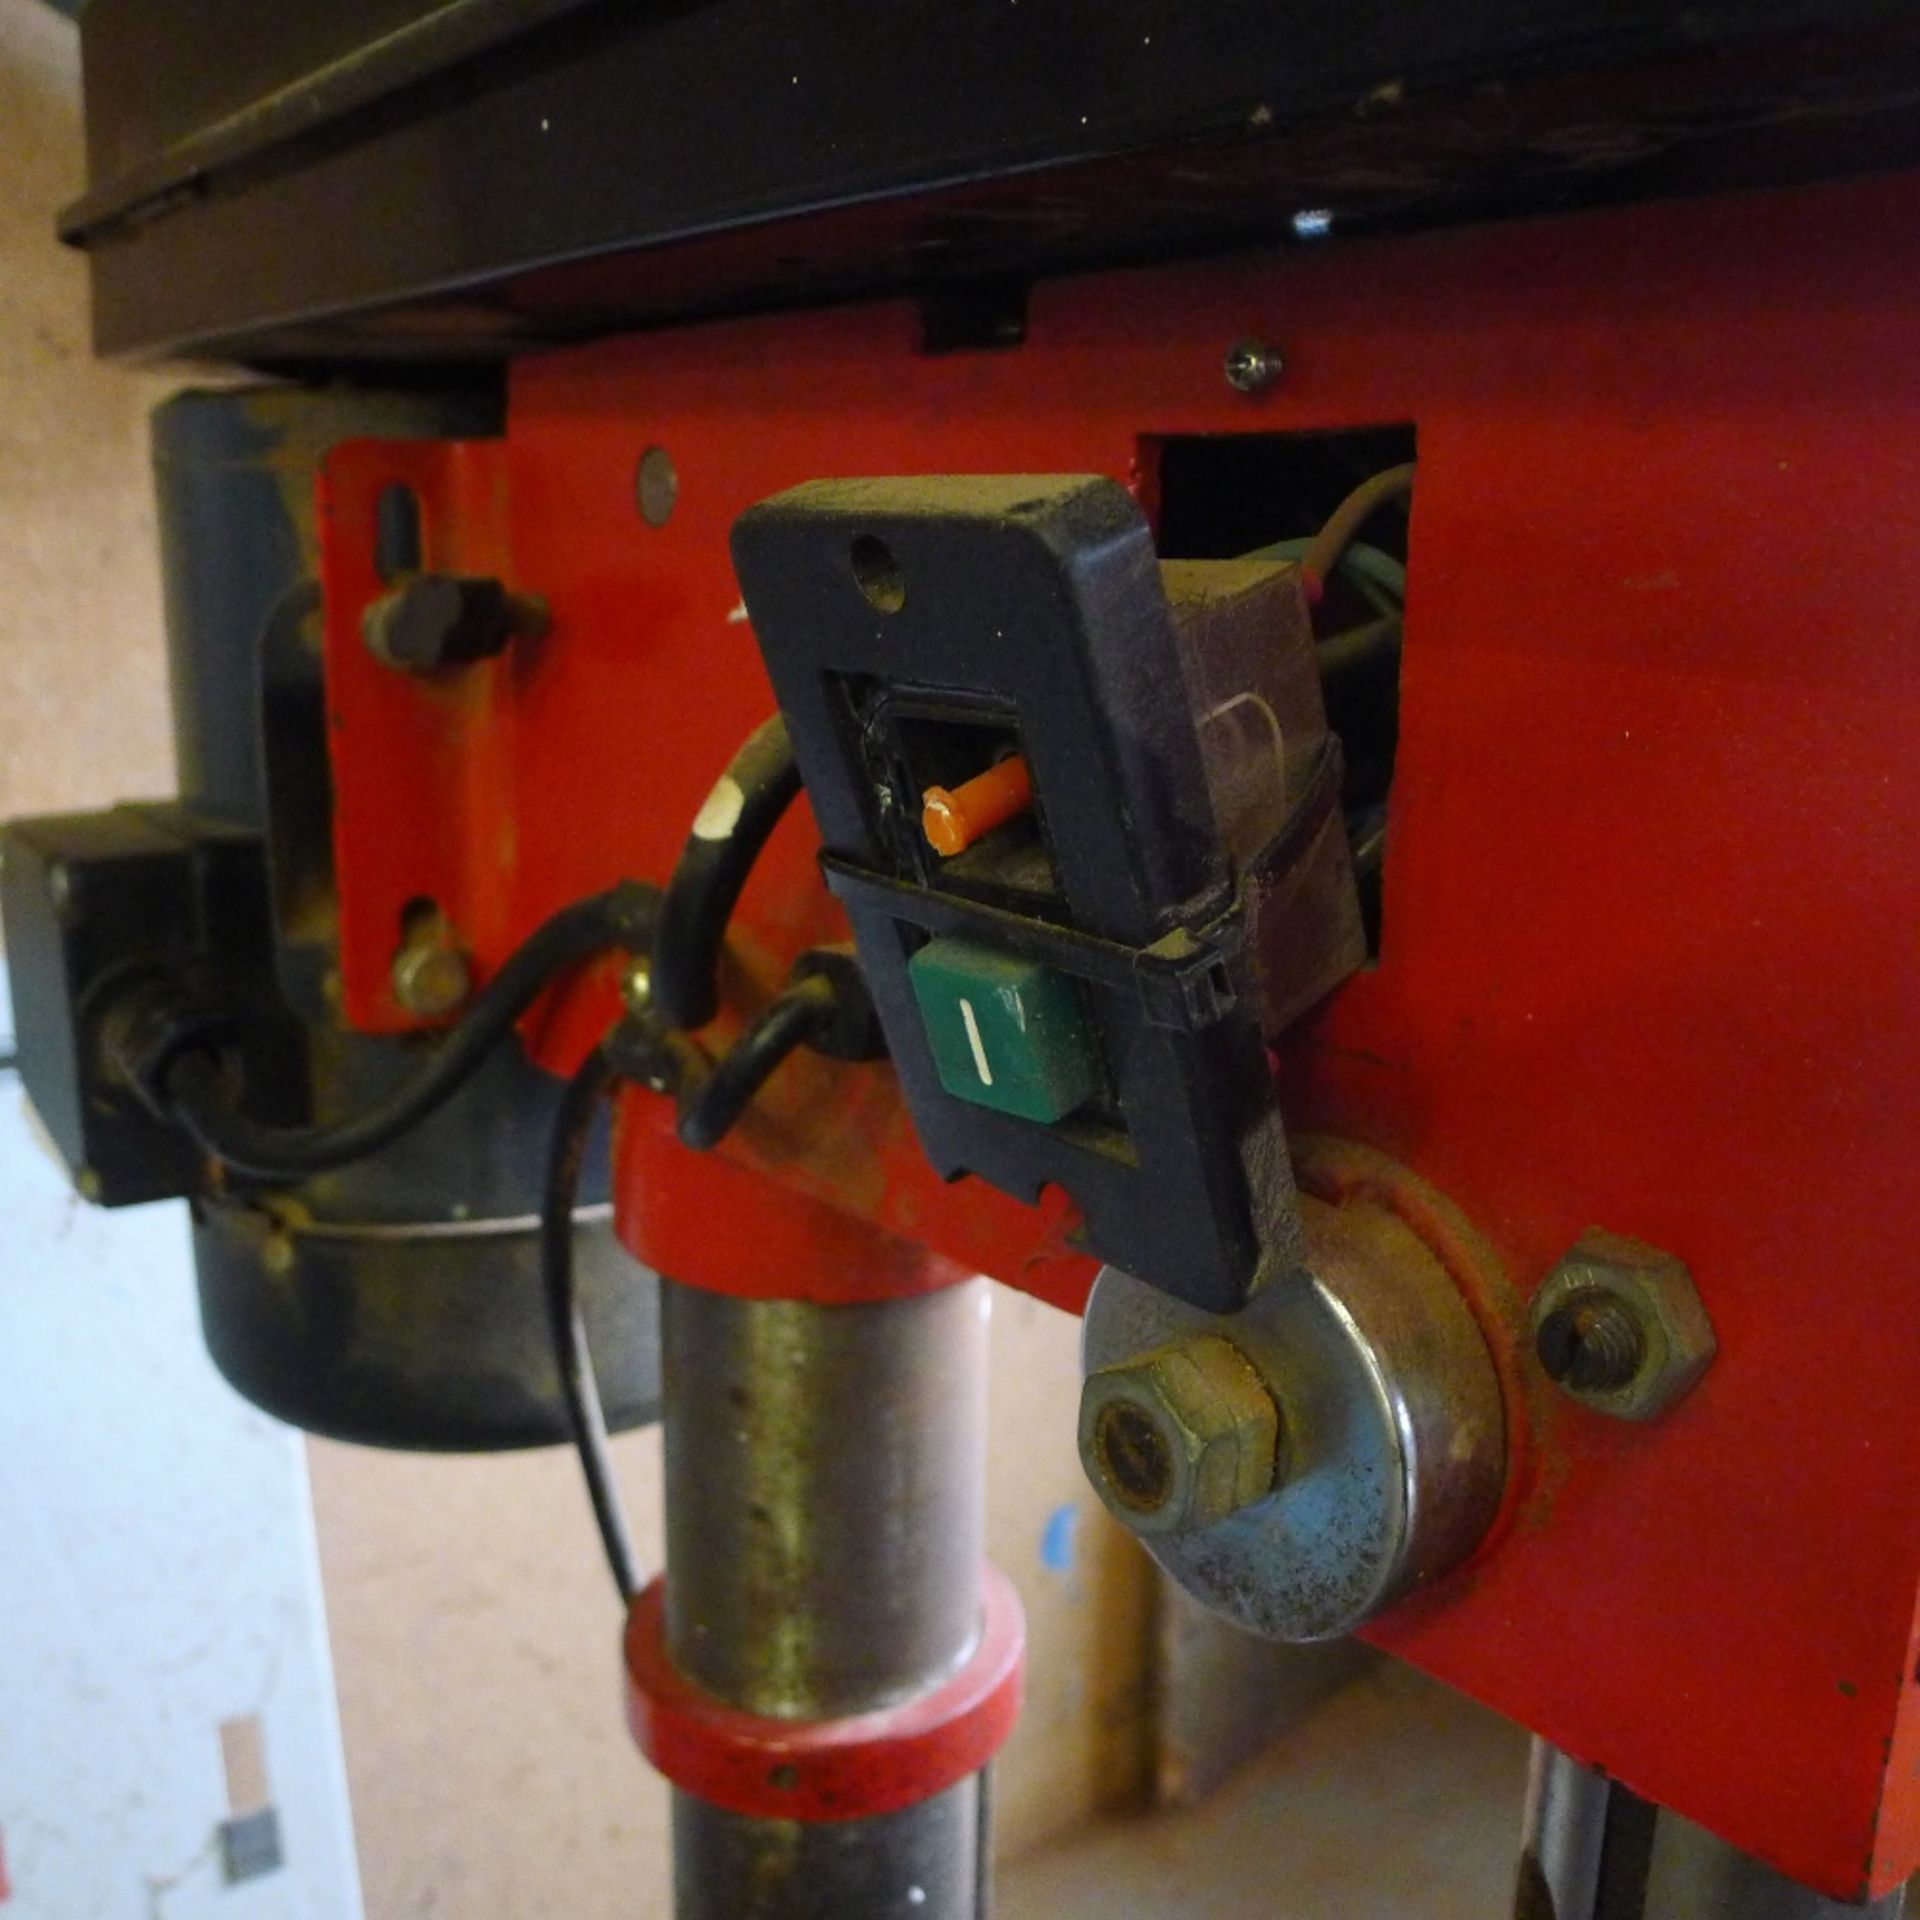 1 bench top pillar drill by Sealey type SDM 150, 240v – start / stop switch requires attention - Image 4 of 4